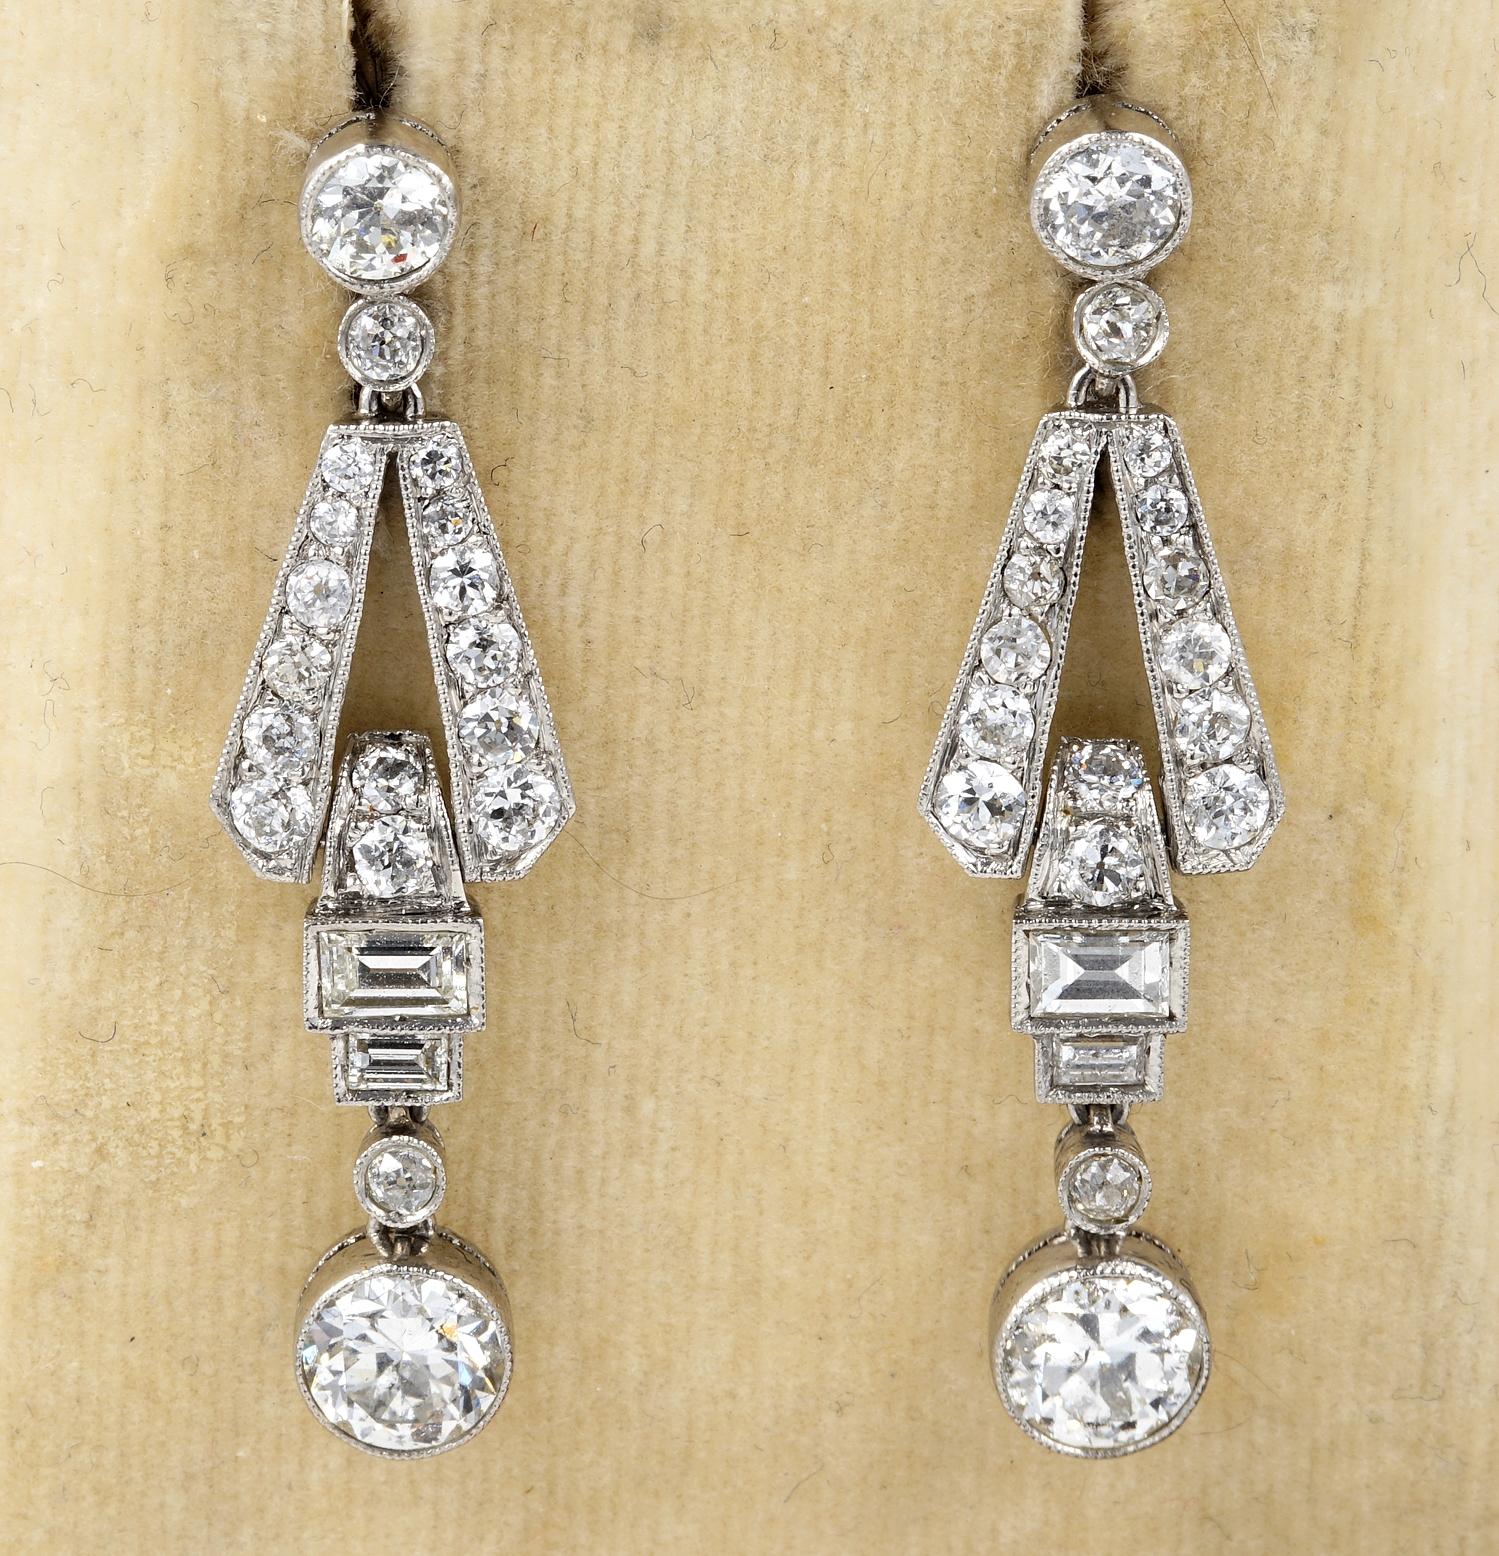 This marvellous pair of Diamond earrings are Art Deco period 1920 ca.
Superb in design expressing in full the refined elegance of that time period
Skilful hand crafted as unique of solid Platinum
Set with 3.60 TCW of old European cut Diamonds  G